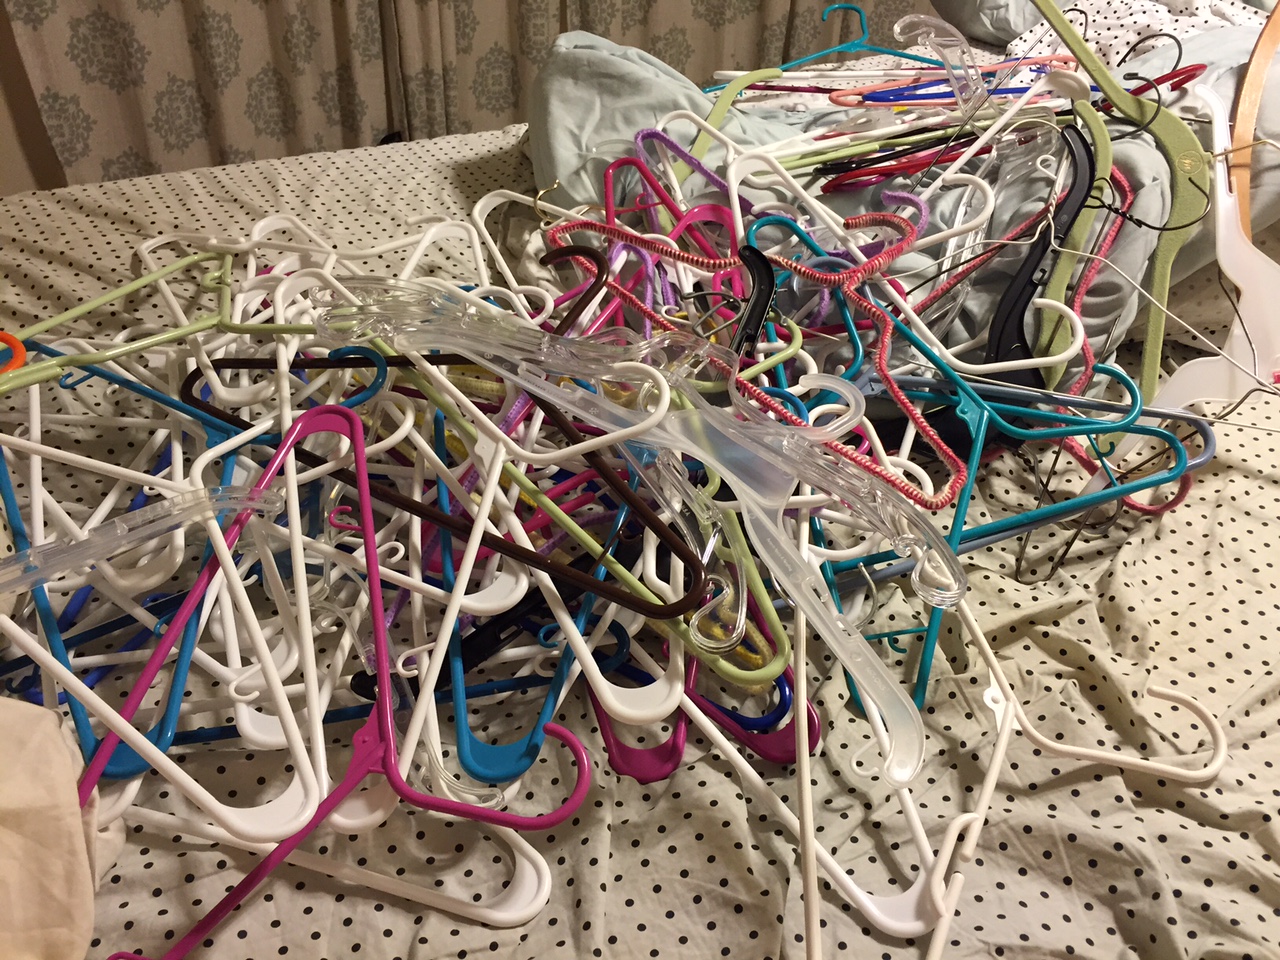 This is how many hangers I cleared up taking out the items I rarely wore or didn't feel good in. (Crazy, right?)